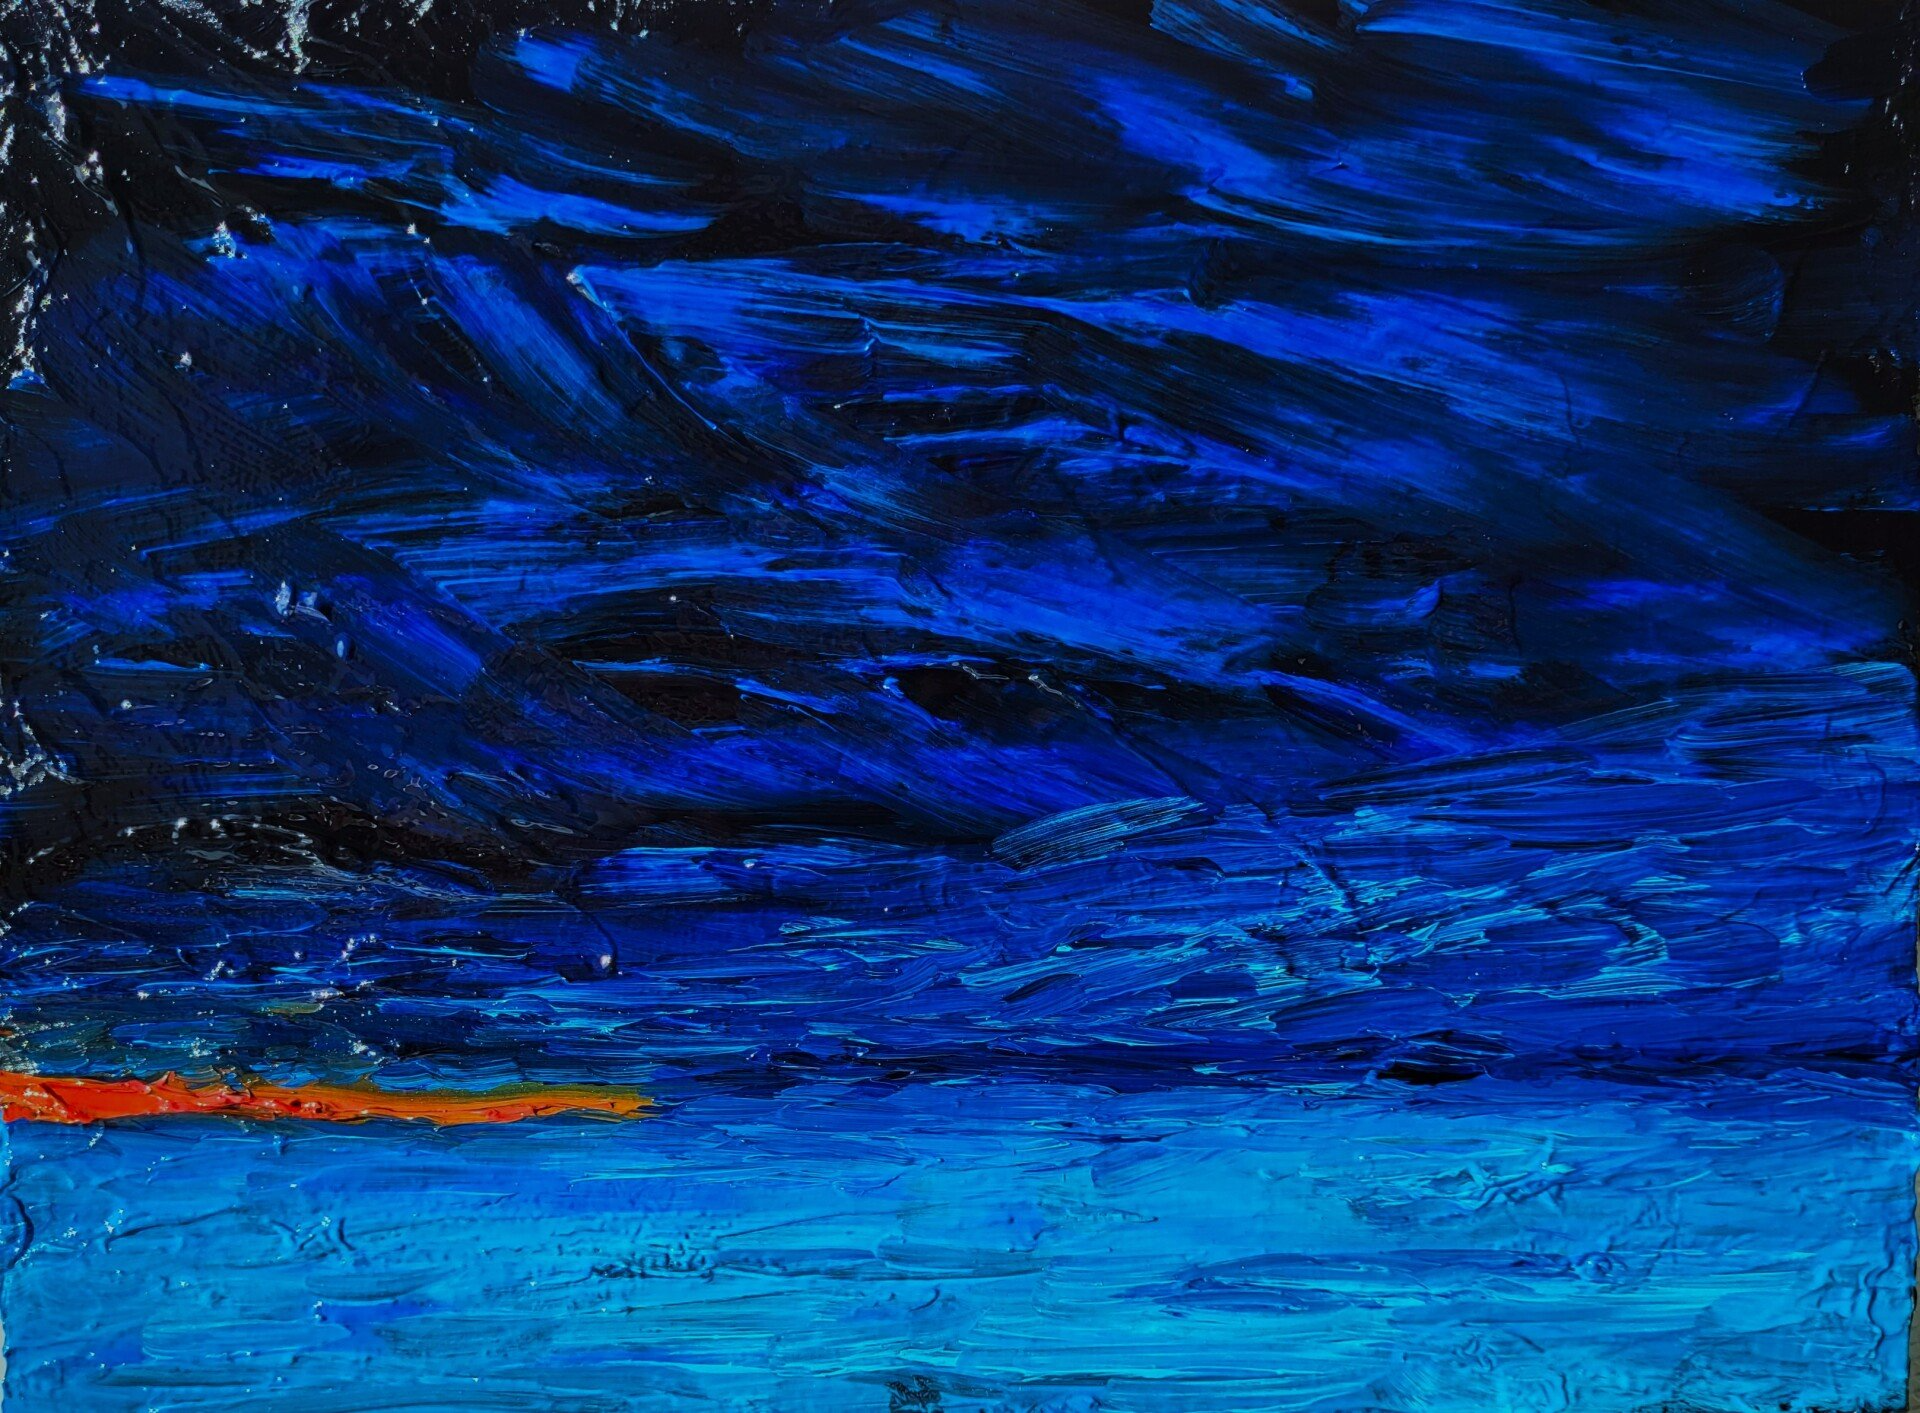 The village oil on Canvas Board 8 in. x 6 in. is one of the paintings I did after  a visit to the  Charlevoix region of Québec, Canada. Rich deep blues (manganese blue Phitalo Prussian) with a sliver of orange depicting the vilage lights on the other side of the lake.